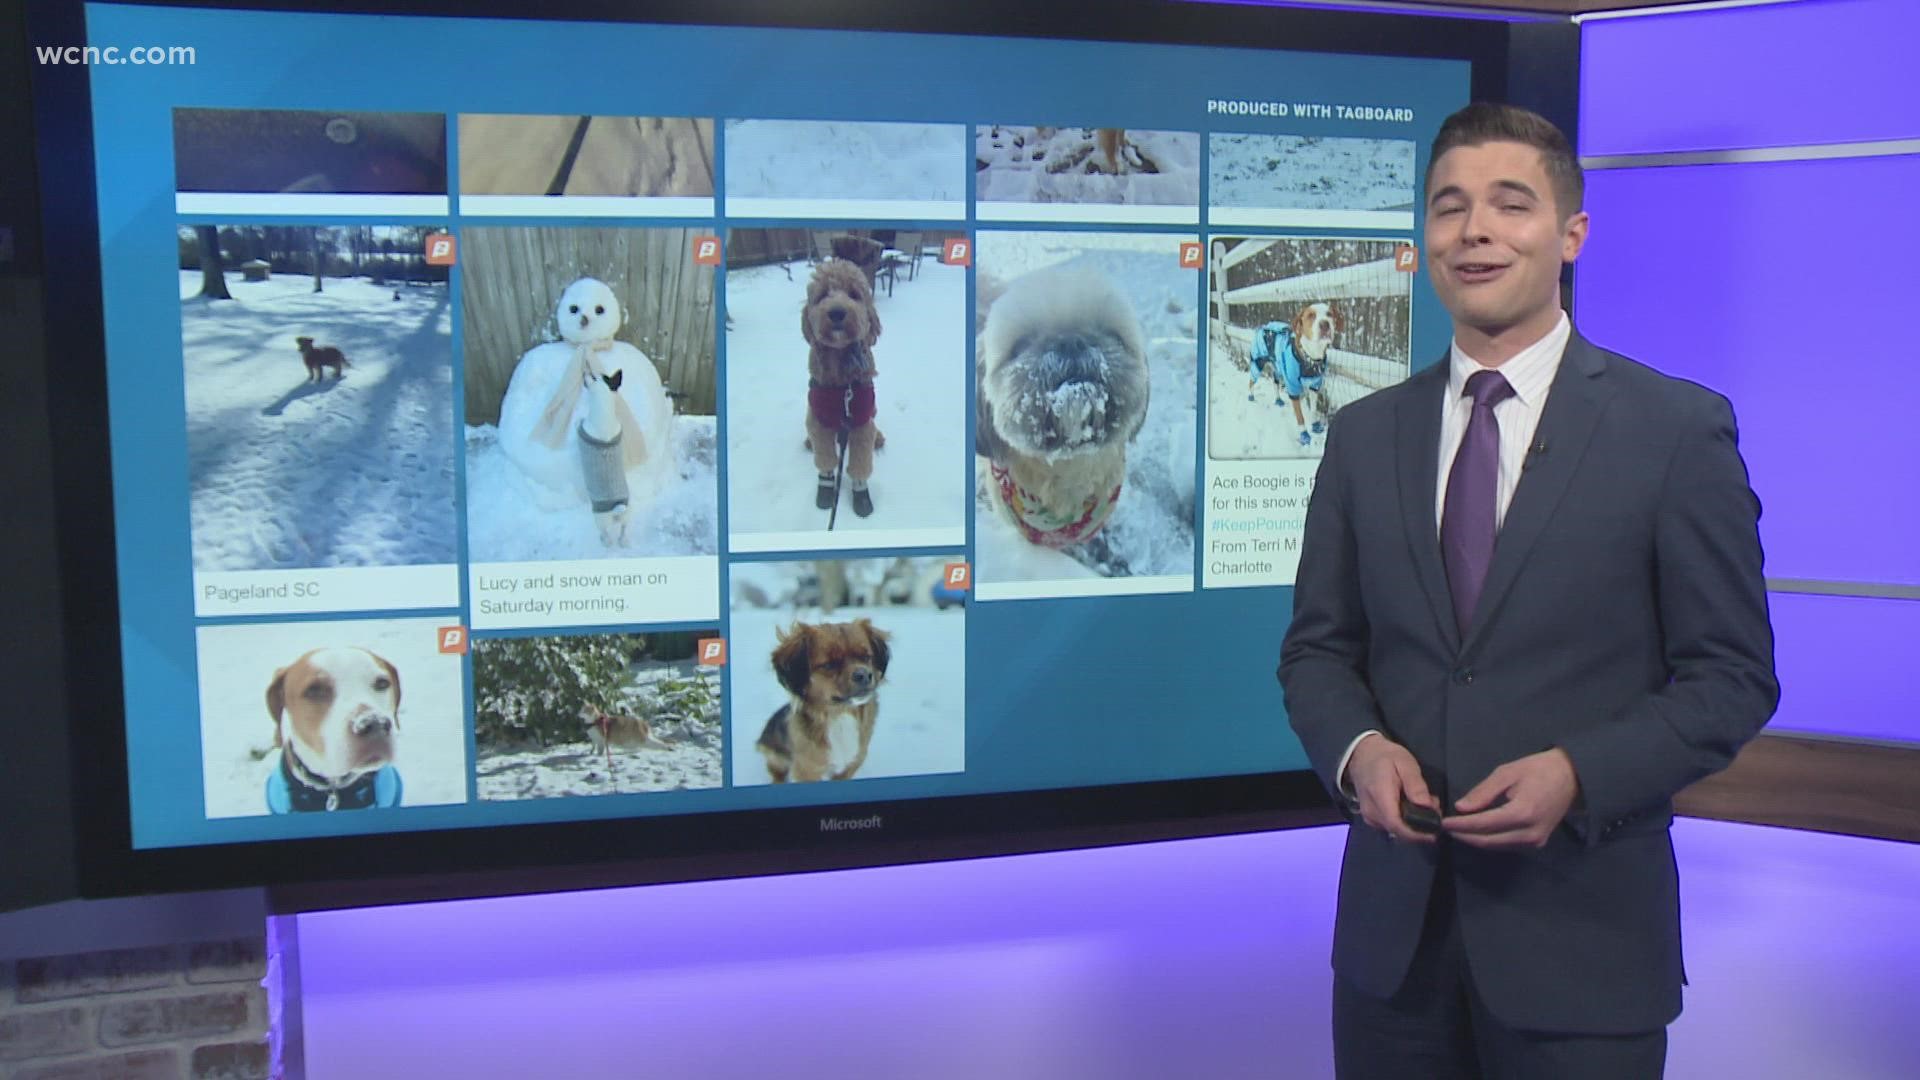 WCNC Charlotte viewers showed us how their furry friends enjoyed the snow!